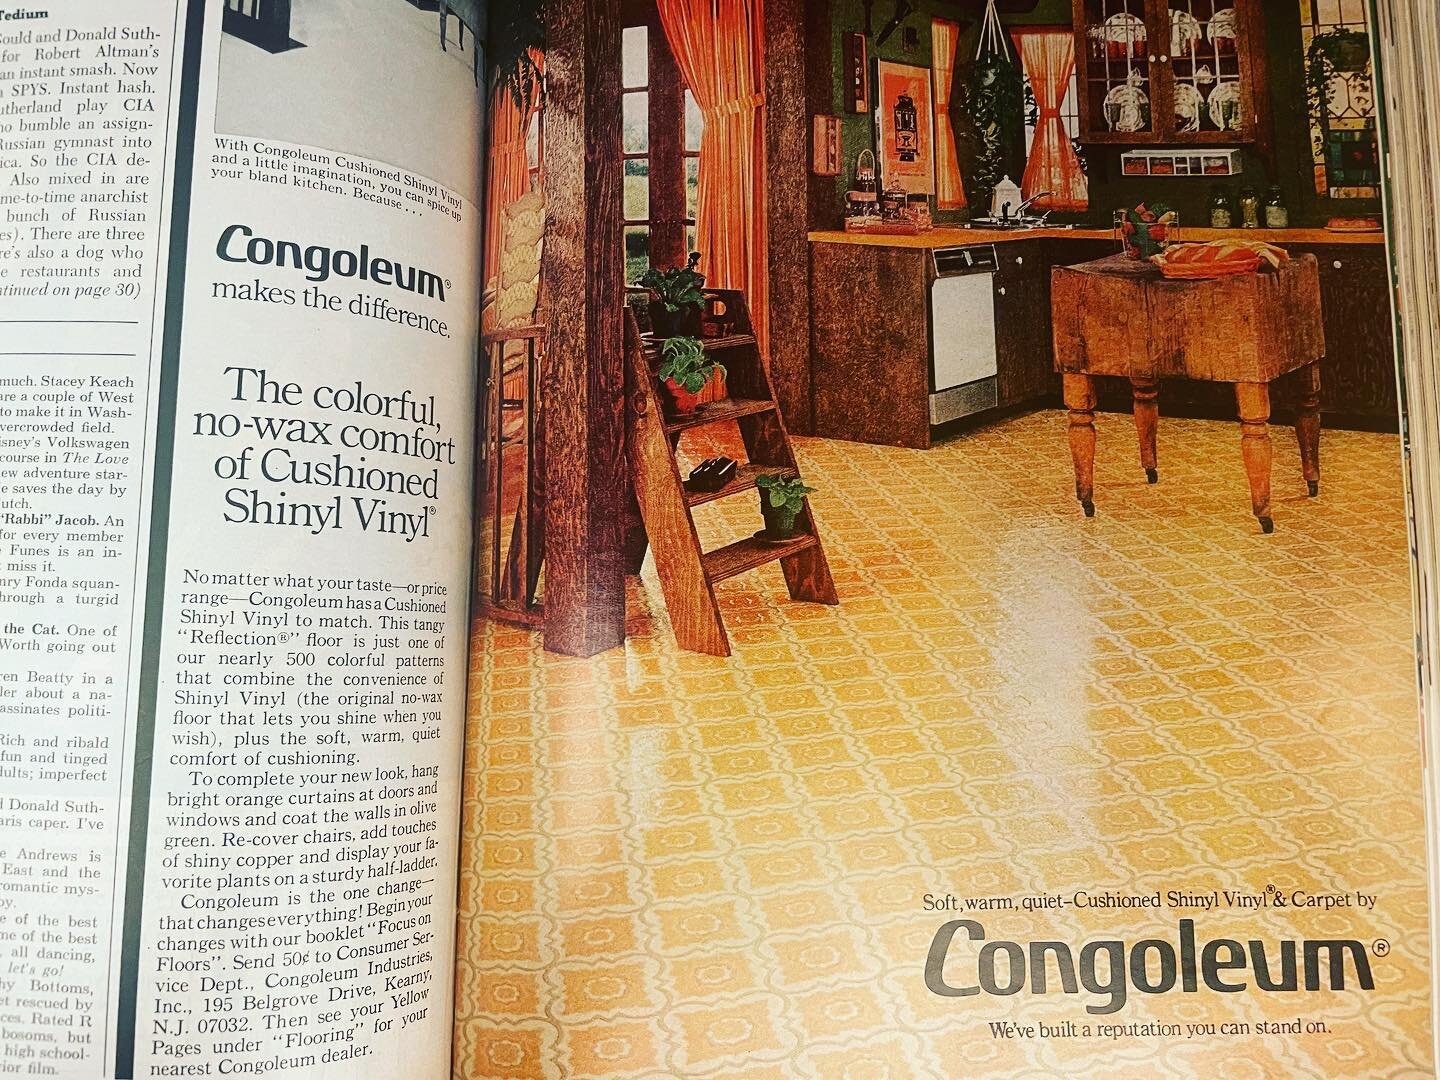 &ldquo;CONGOLEUM: The Colorful No-Wax Comfort of Shinyl Vinyl&rdquo; (in a 1974 Ladies&rsquo; Home Journal)